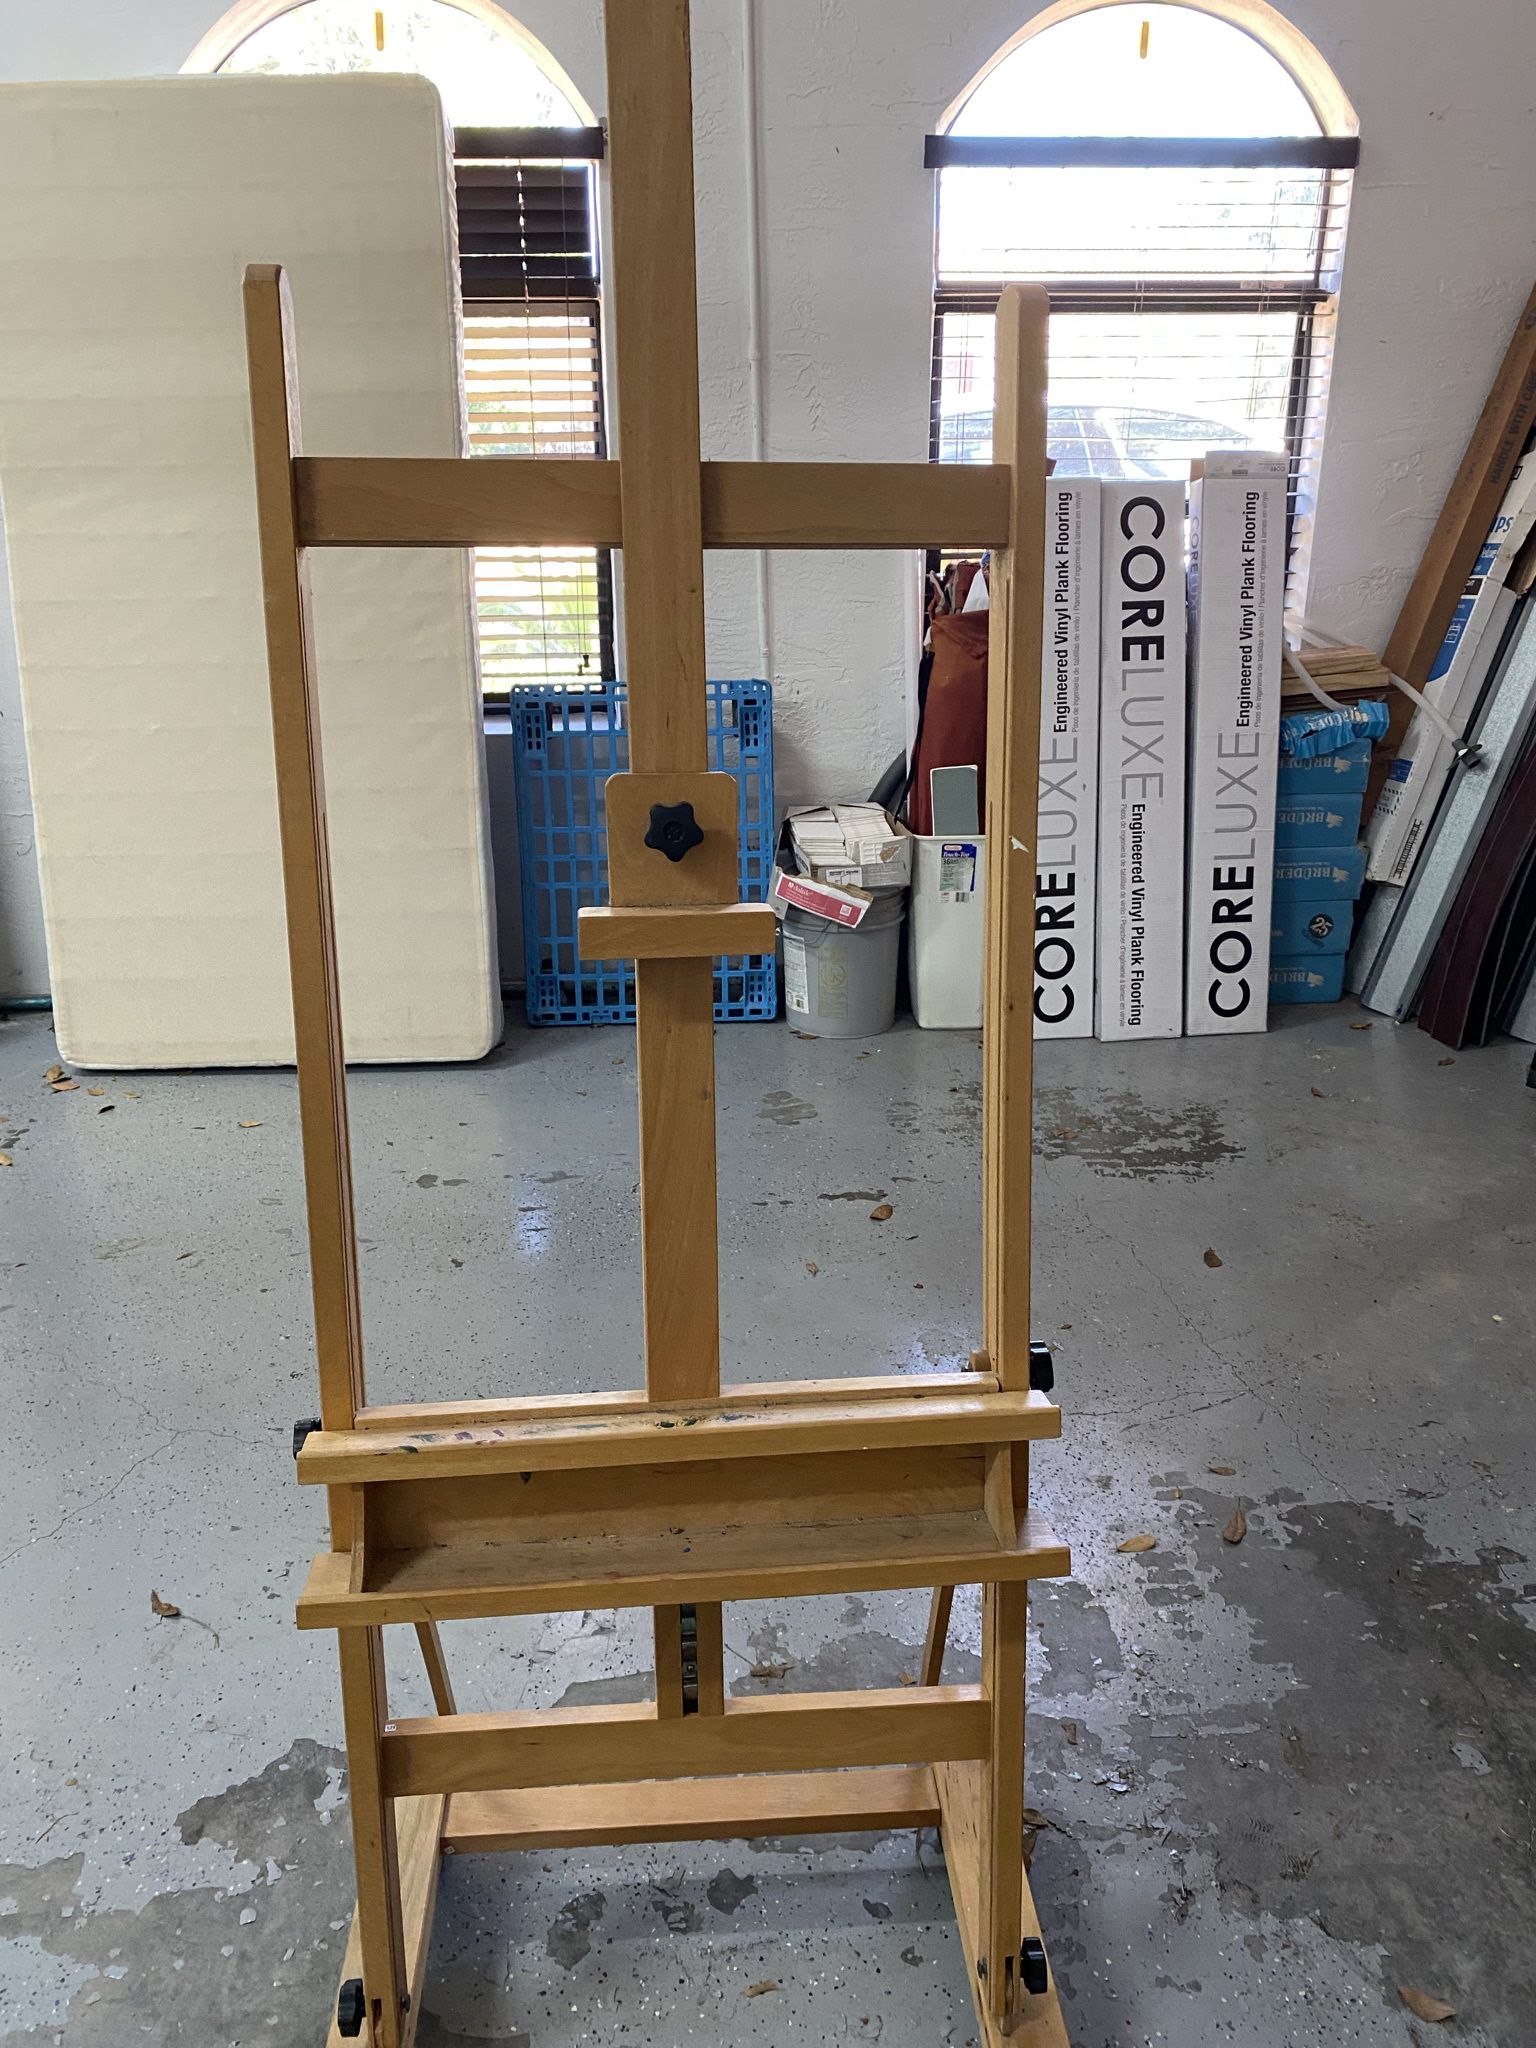 Large Carolina Wooden H-frame Easel for Sale in Fairfield, CT - OfferUp